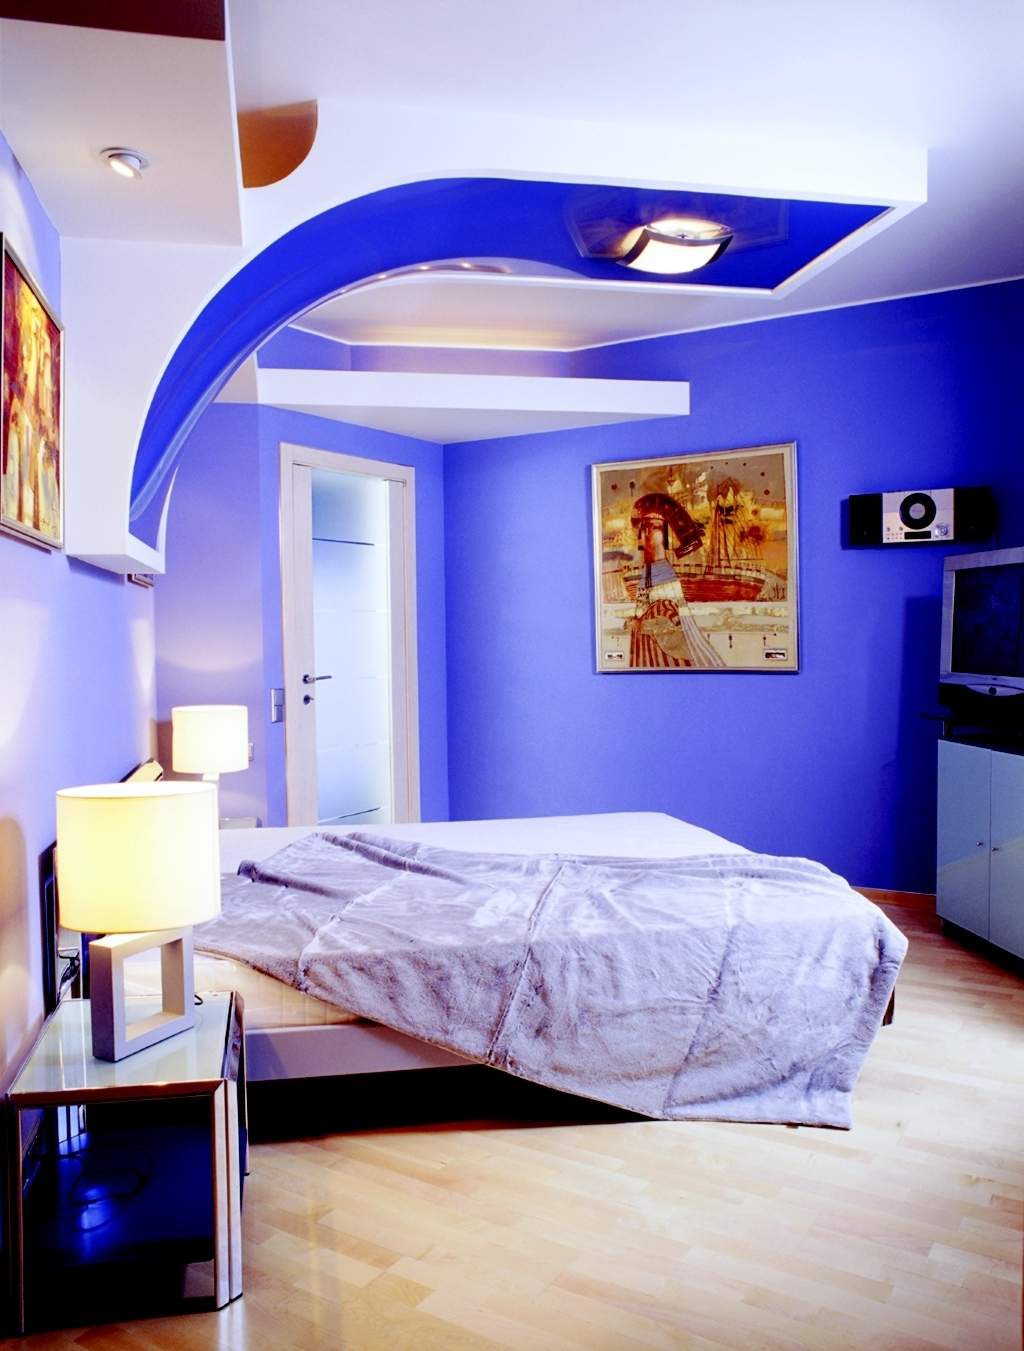 Blue And Wall Shiny Blue And Bright Painted Wall For Unique Bedroom Ideas With Abstract Painting Bedroom Unique Bedroom Ideas Preserving The Cozy Vibe In Style